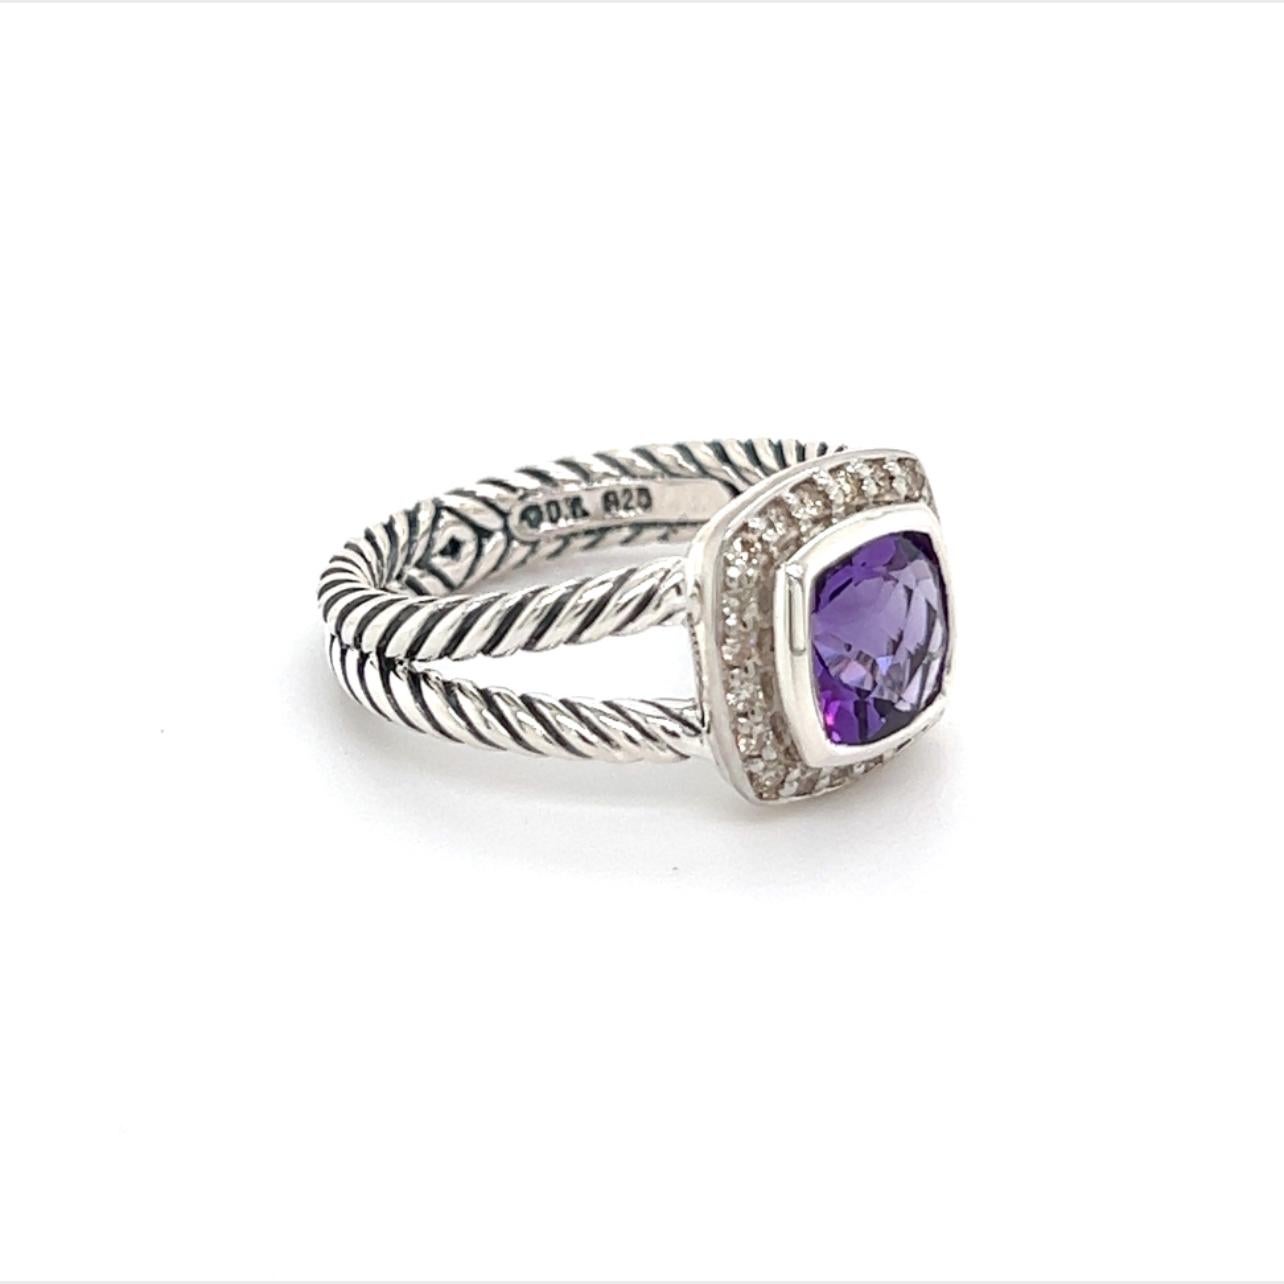 David Yurman Authentic Estate Diamond Petite Albion Amethyst Ring Size 6.5 Sil 1.67 TCW DY190

Retail: $999

Ring from ALBION COLLECTION

This elegant Authentic David Yurman ring is made of sterling silver and has a weight of 5.43 grams.

TRUSTED